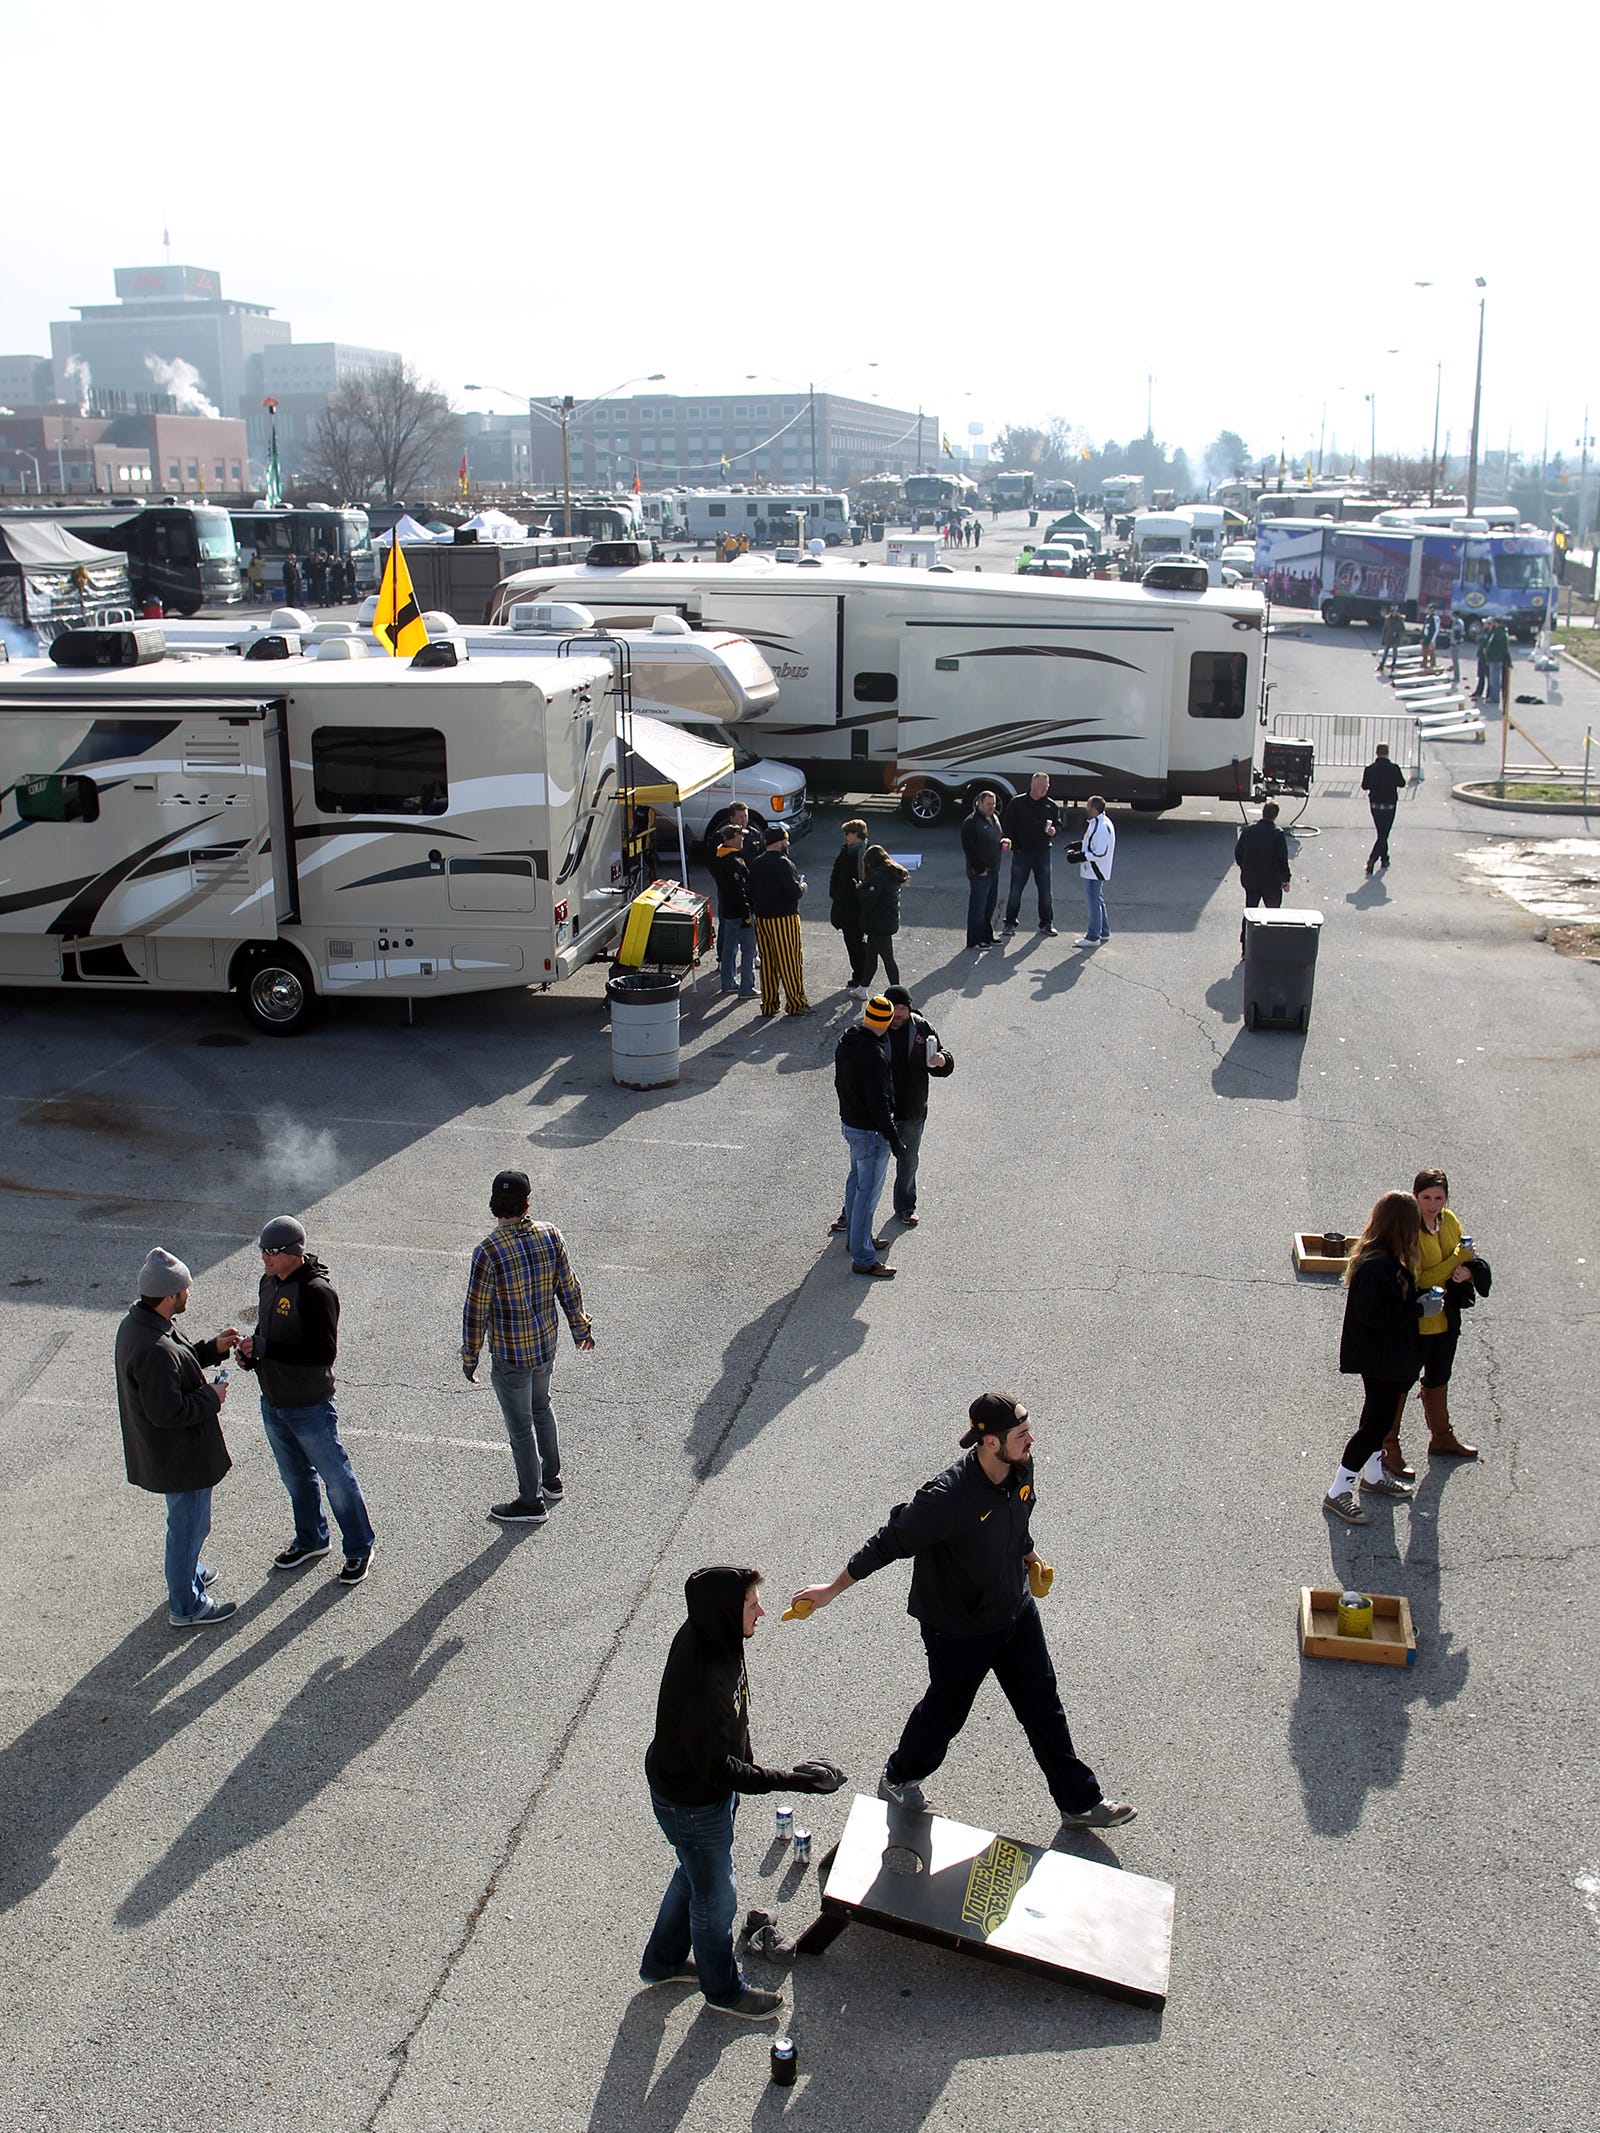 Iowa fans tailgate prior to the Hawkeyes' Big Ten Championship game against Michigan State at Lucas Oil Stadium in Indianapolis, Ind. on Saturday, Dec. 5, 2015.